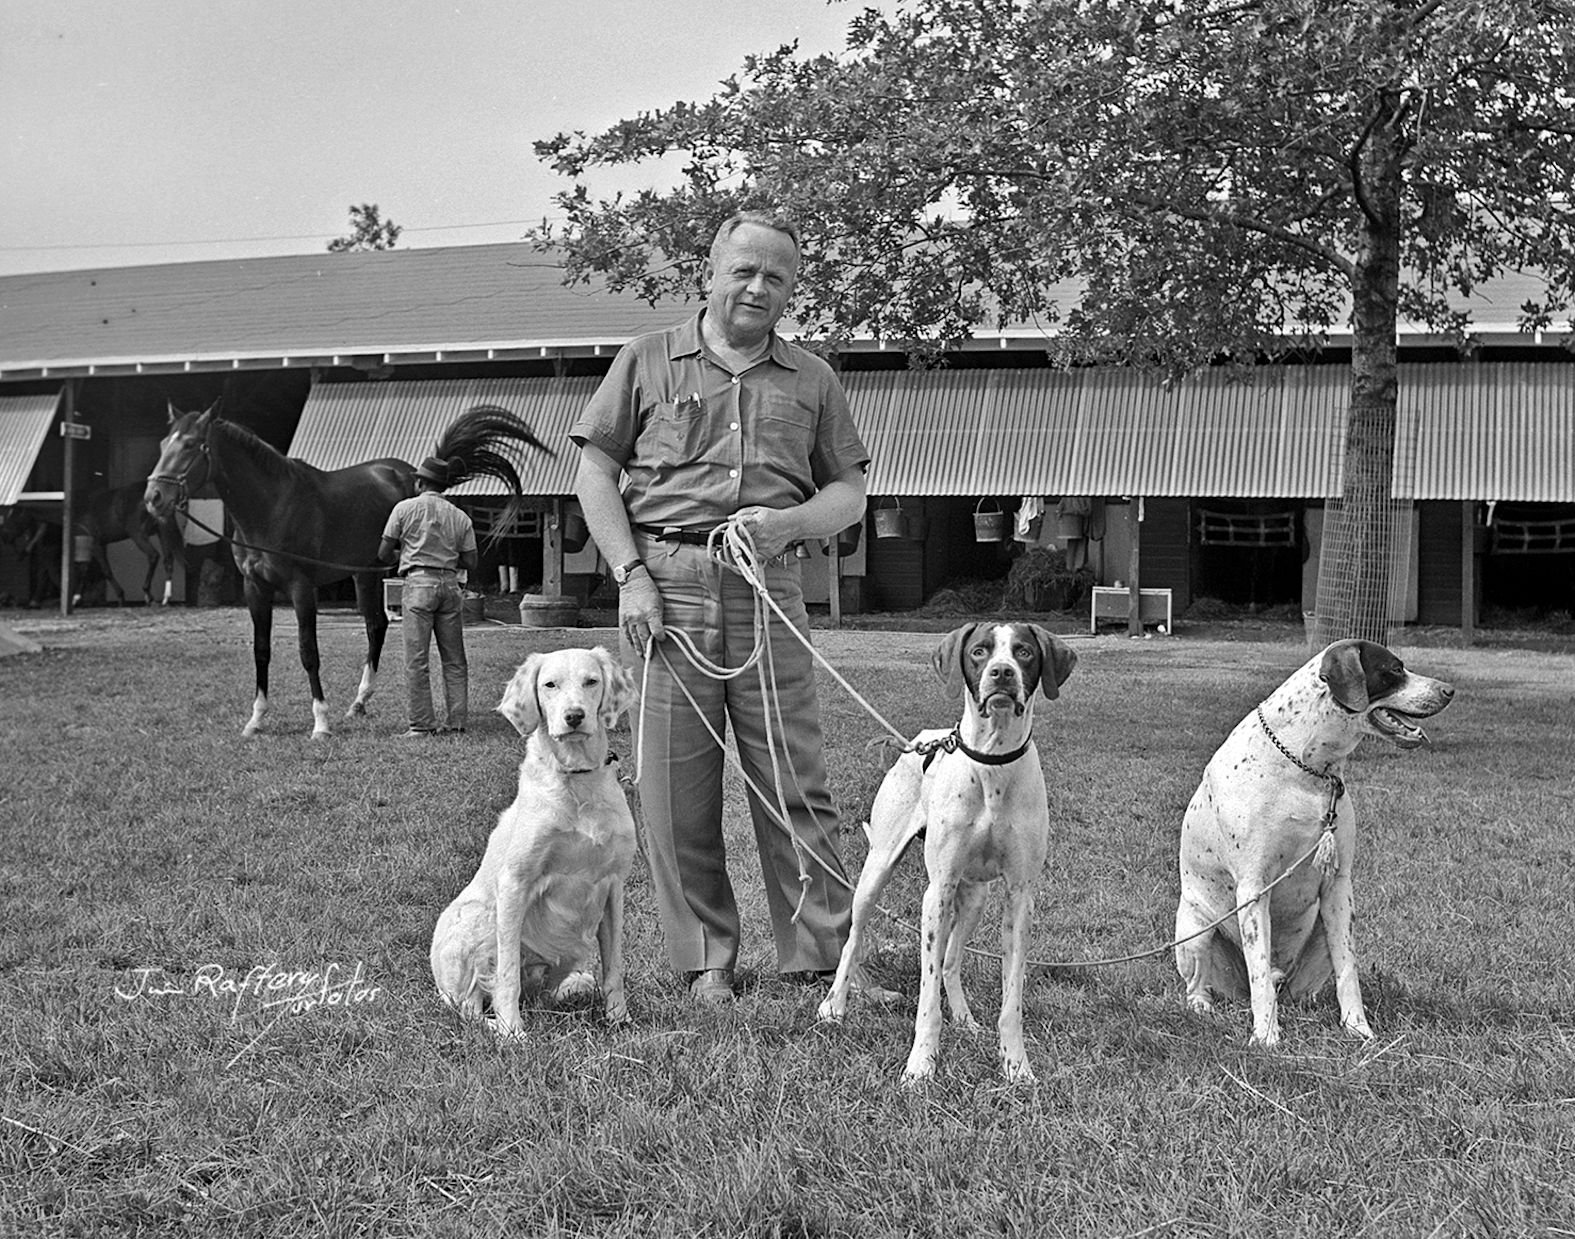 Jimmy Jones and his dogs, July 2, 1964 (Jim Raftery Turfotos)